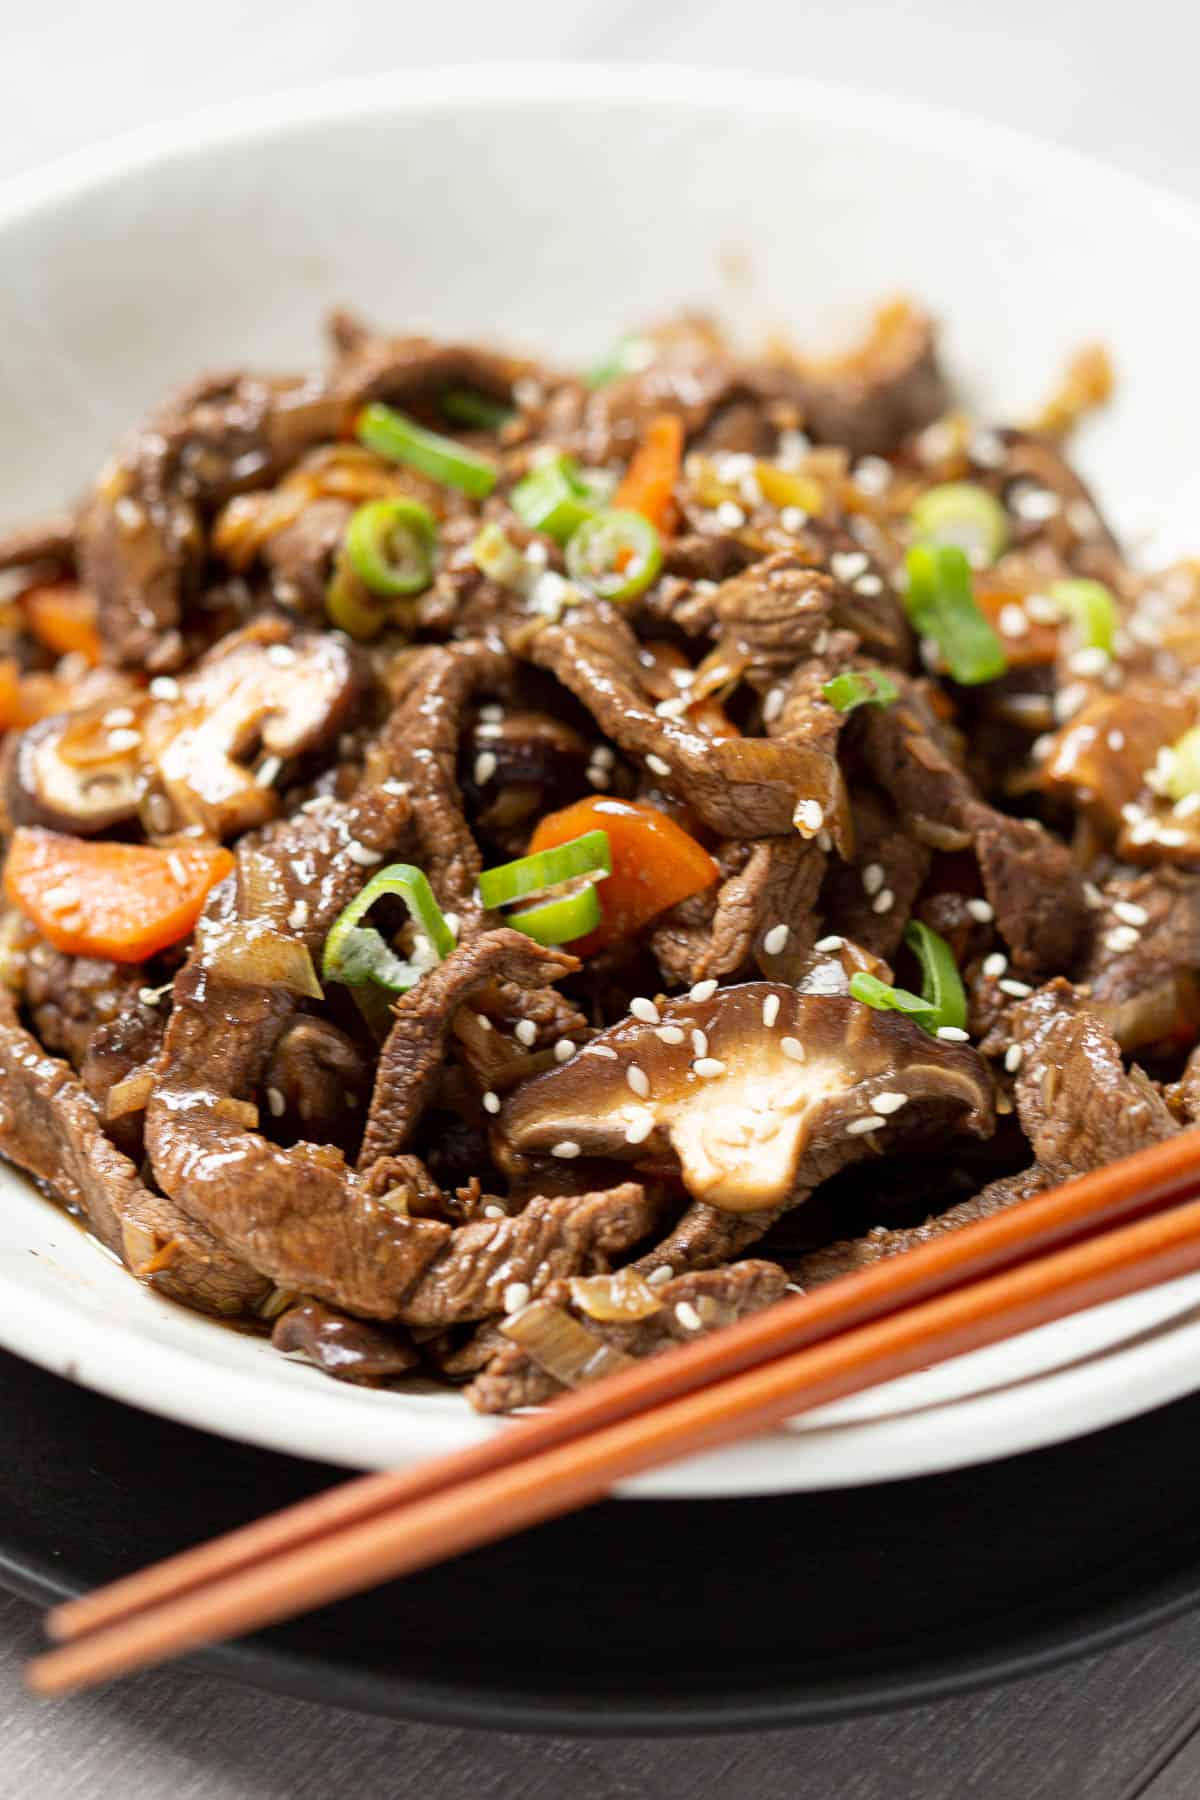 Beef bulgogi cooked with shiitake mushrooms in a bowl next to wooden chopsticks.